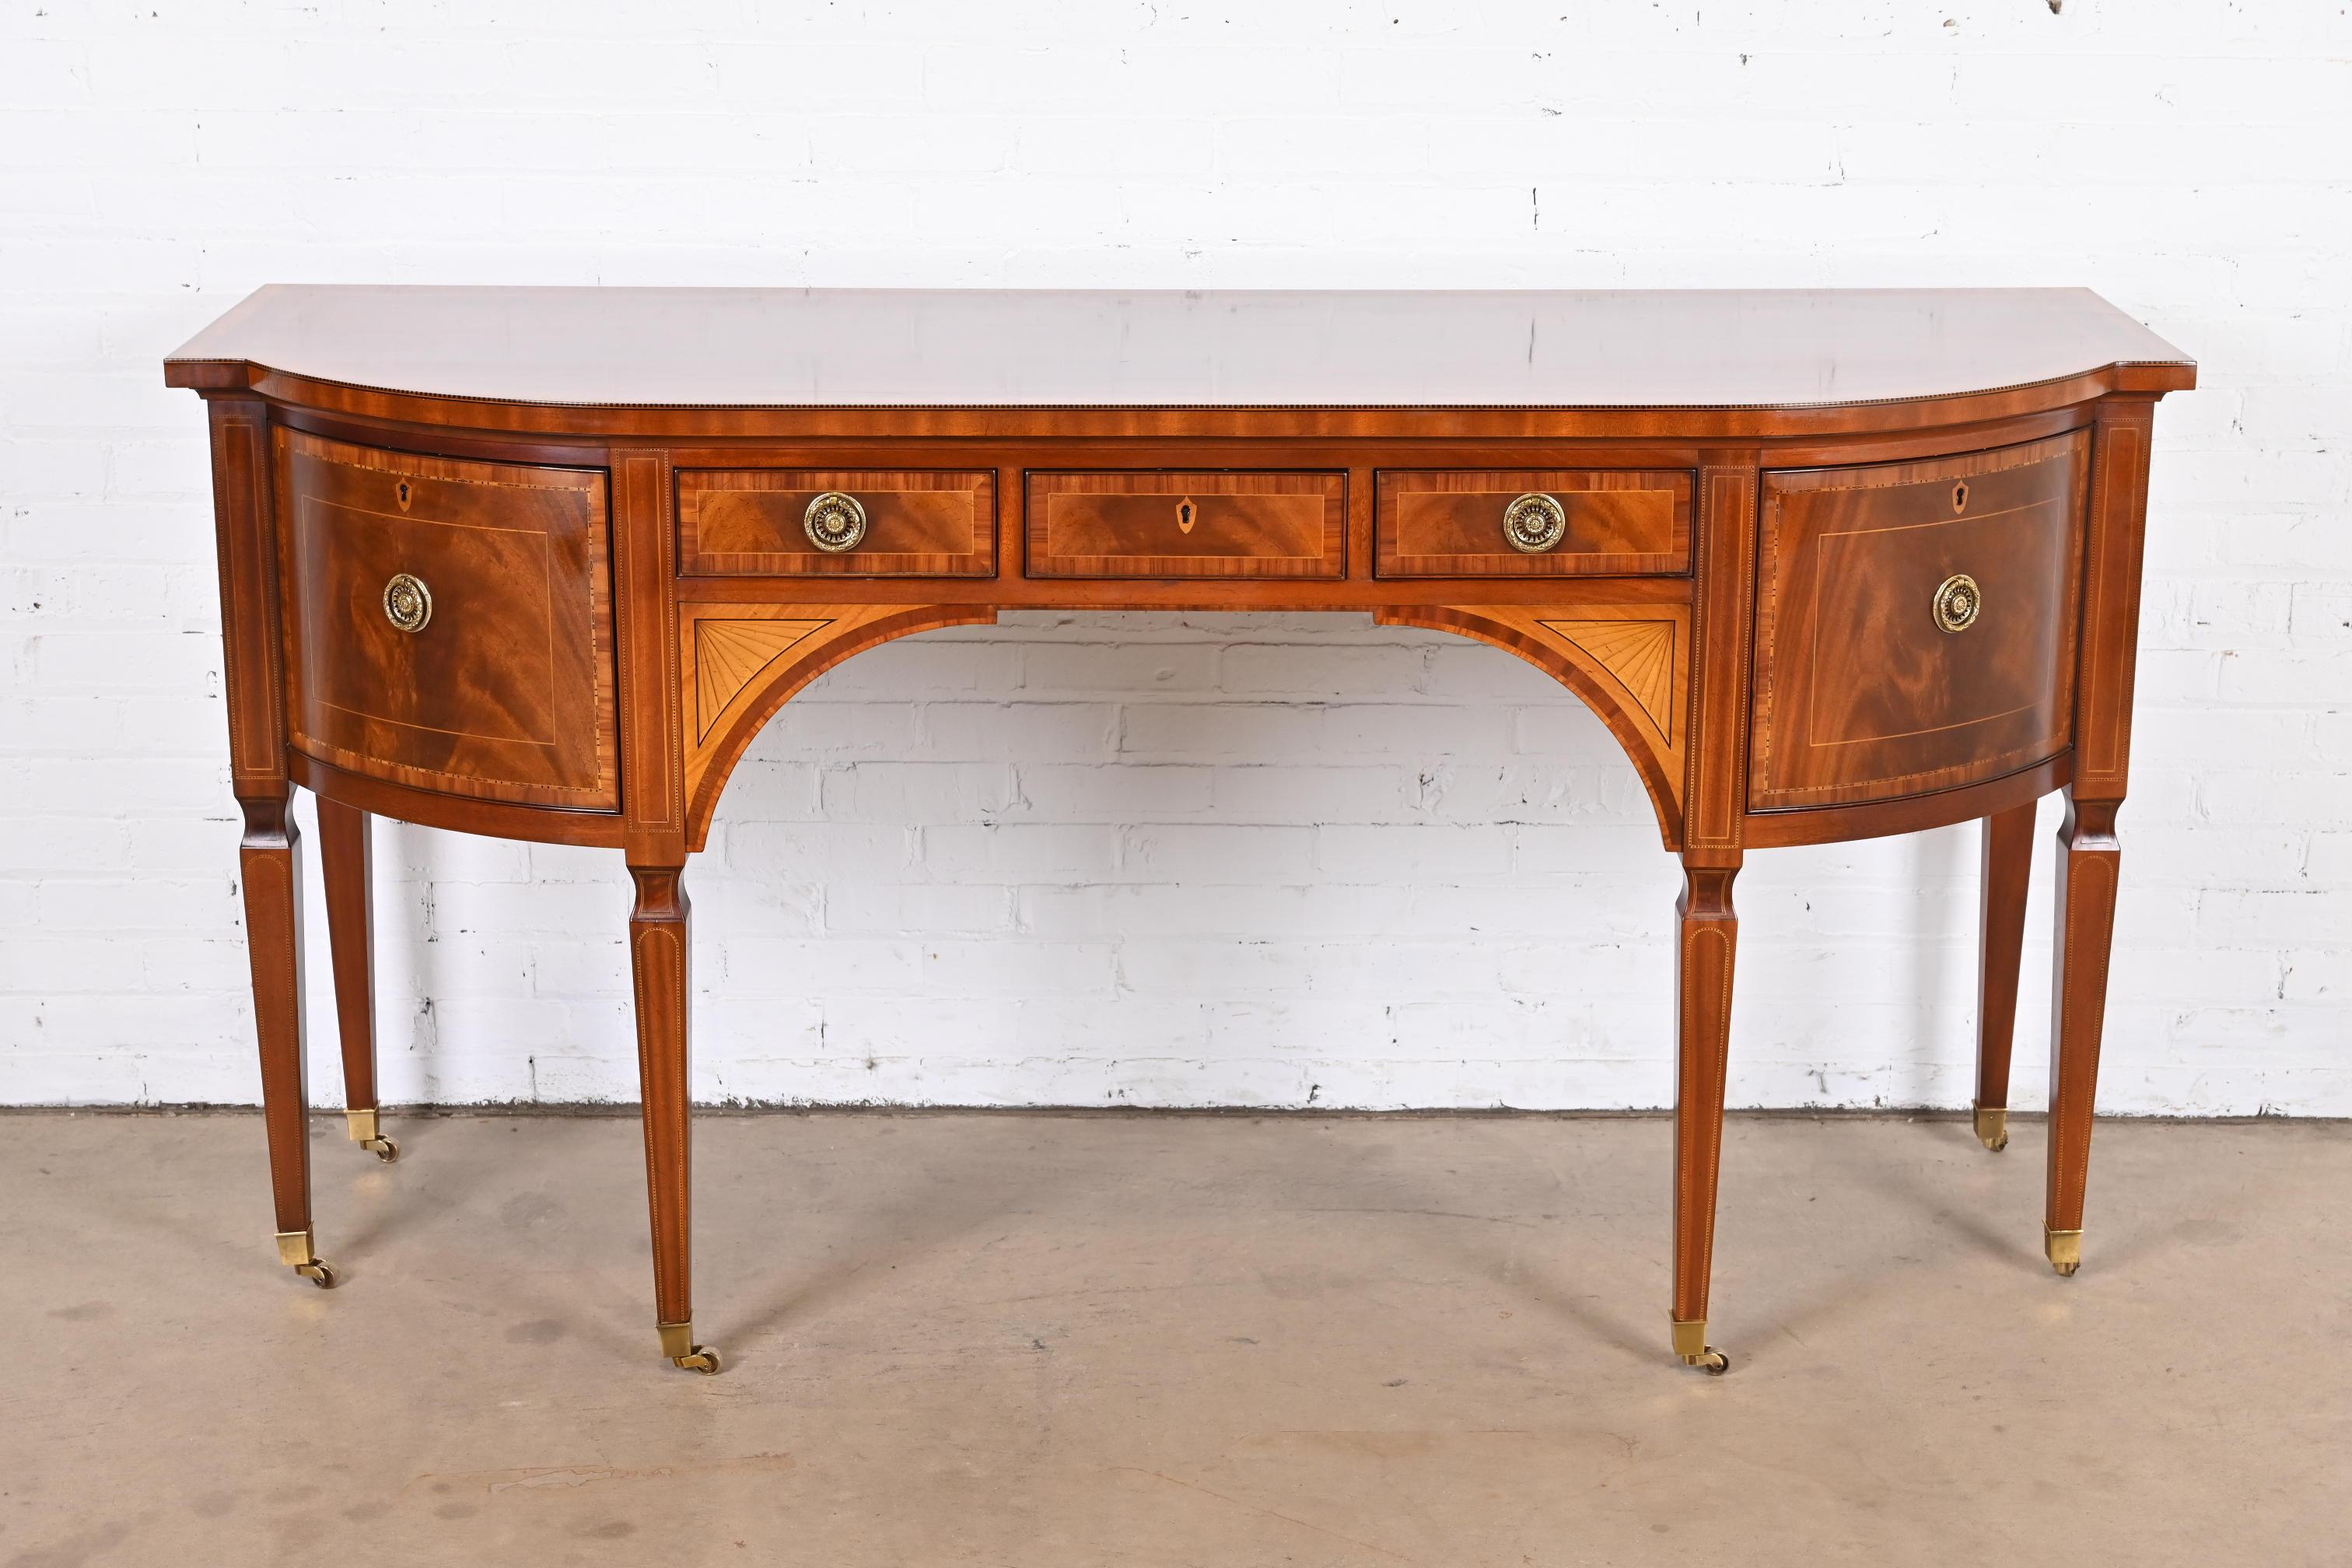 A rare and exceptional Sheraton or Hepplewhite bow-fronted mahogany sideboard from the exclusive Stately Homes Collection by Baker Furniture.

The sideboard is crossbanded with satinwood and tulipwood and inlaid with chequer pattern bands and